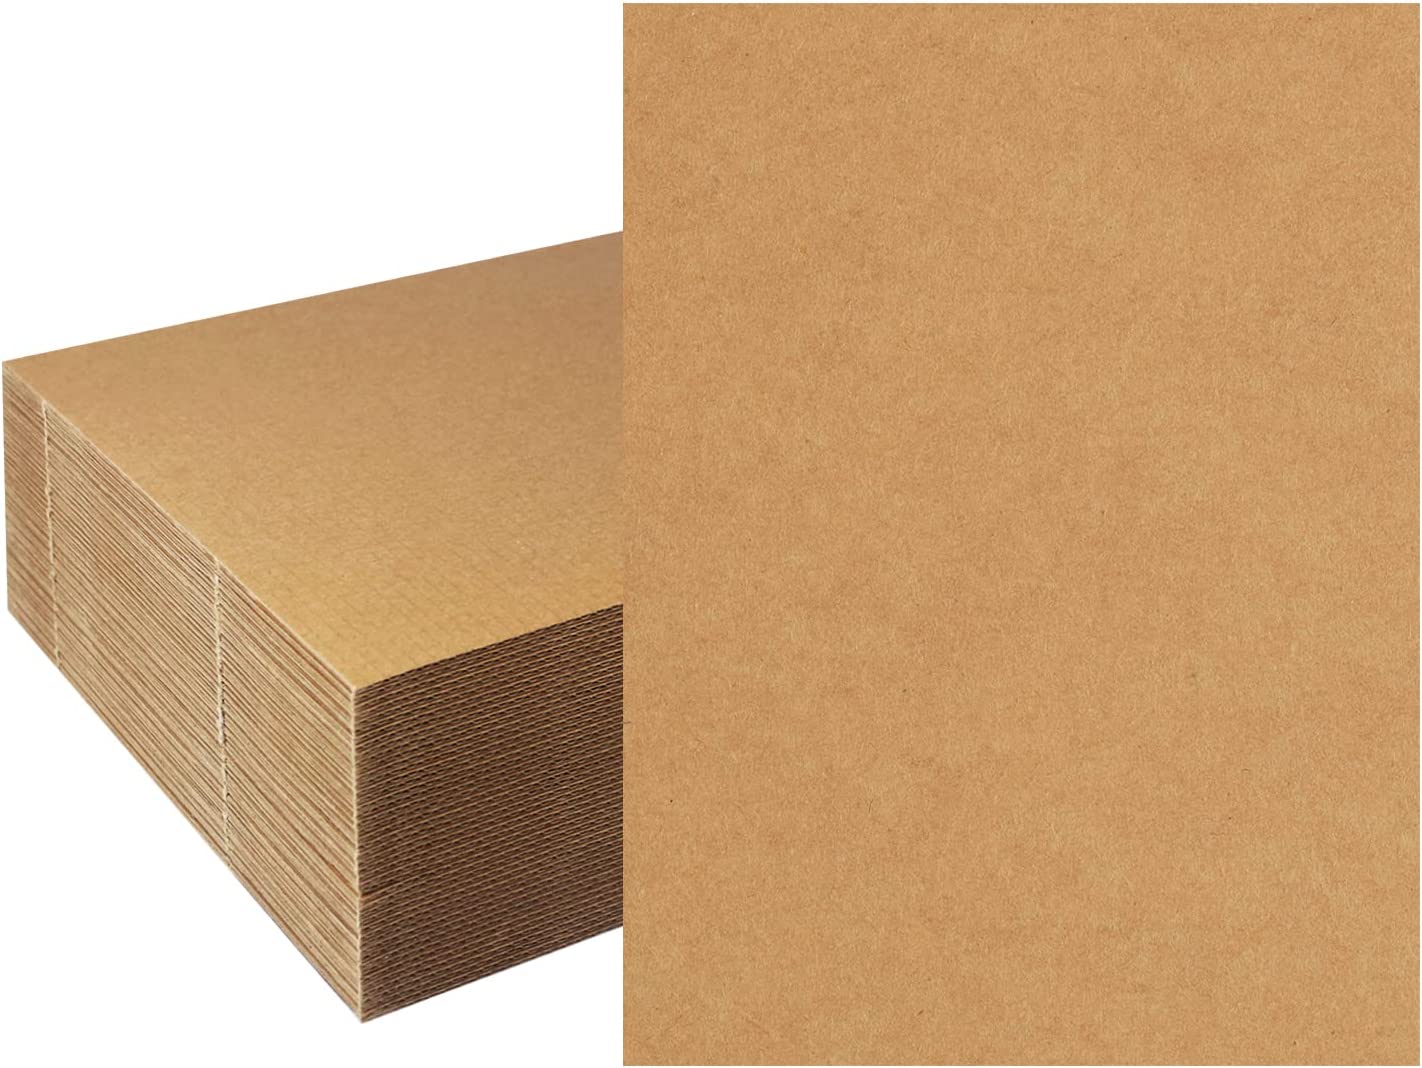 36 Packs 12x12 inch Cardboard Sheets, Premium White Corrugated Cardboard Backing and Corrugated Inserts Bulk for Shipping, Mailing,T-Shirts, DIY